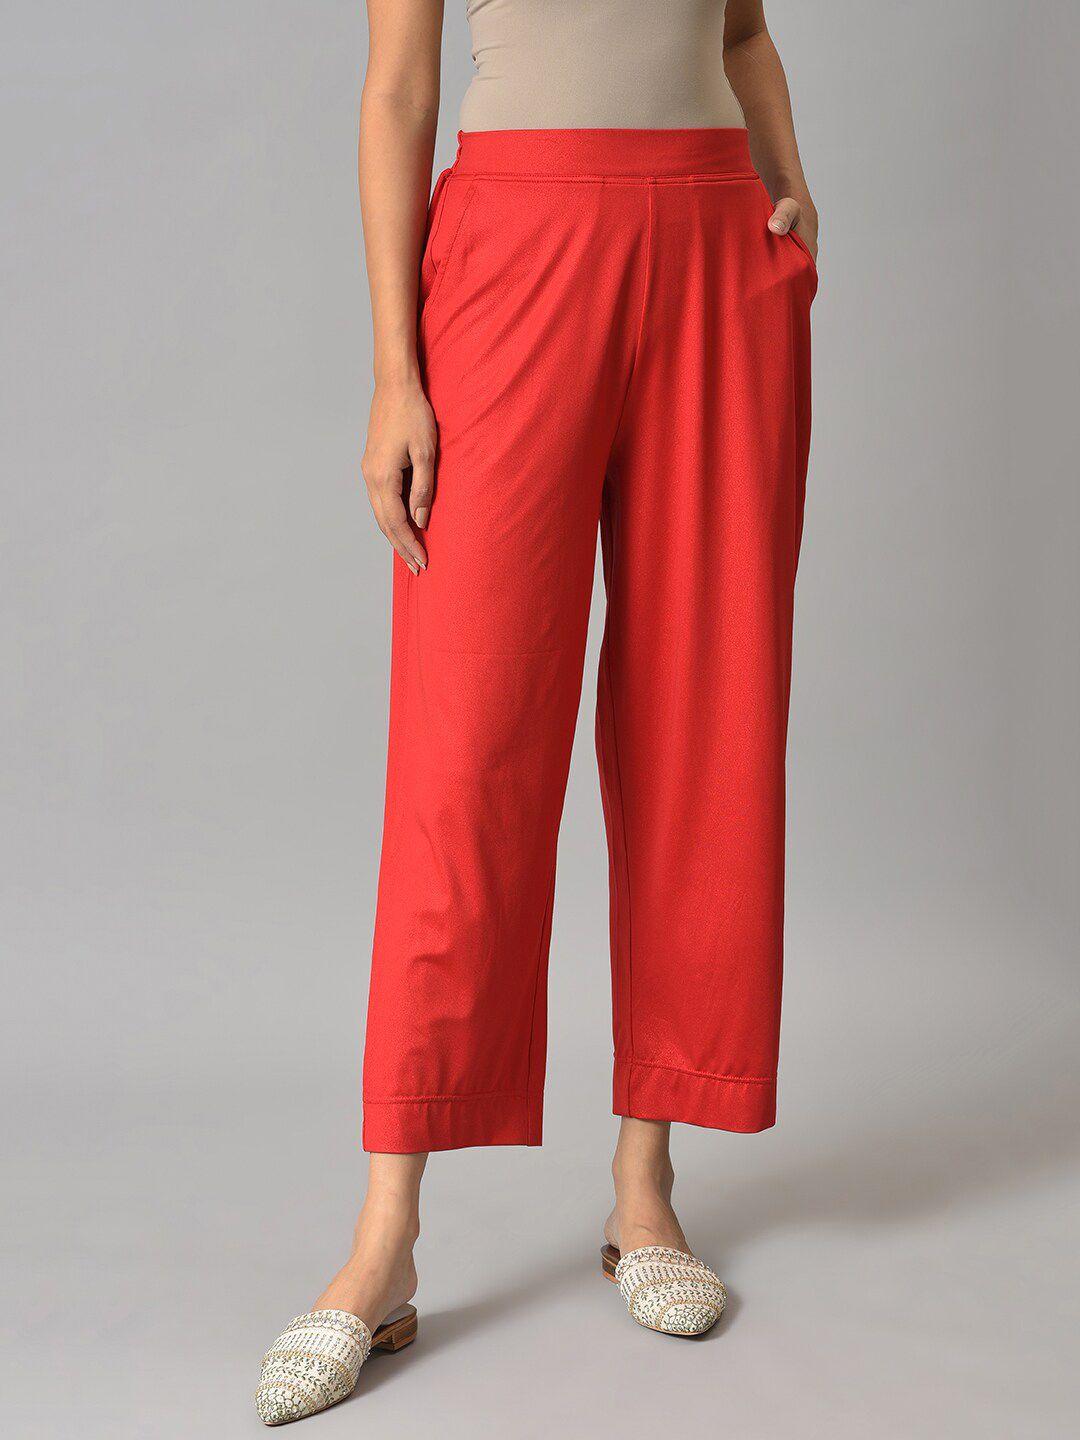 elleven women red knitted palazzos